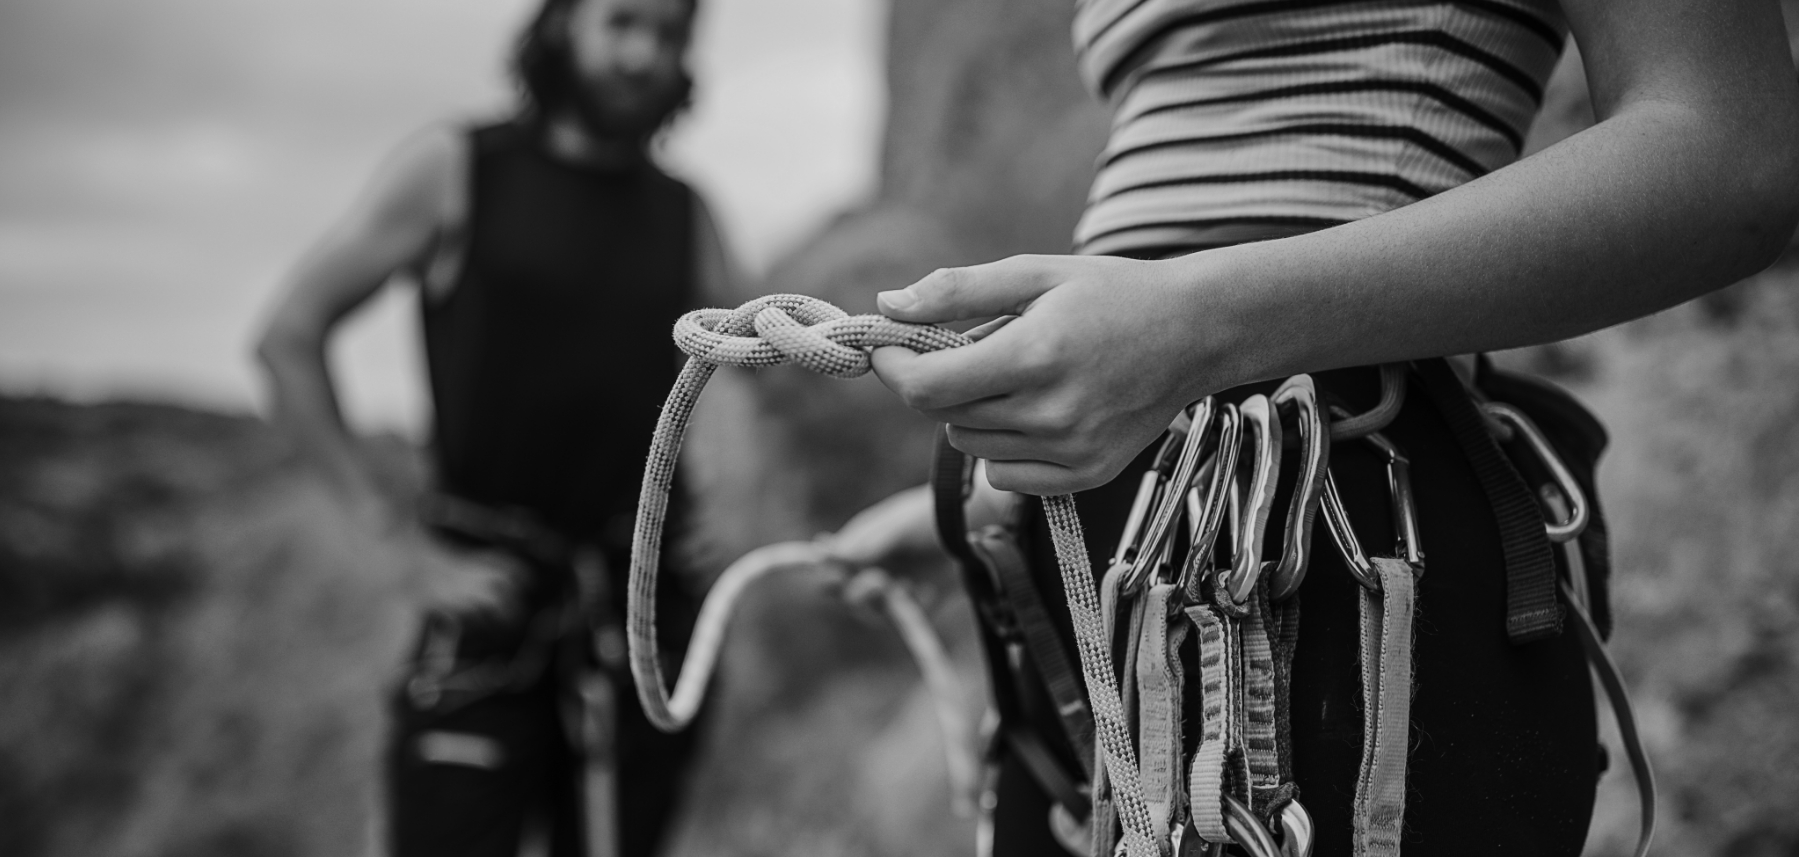 A black and white photo of two people holding ropes.